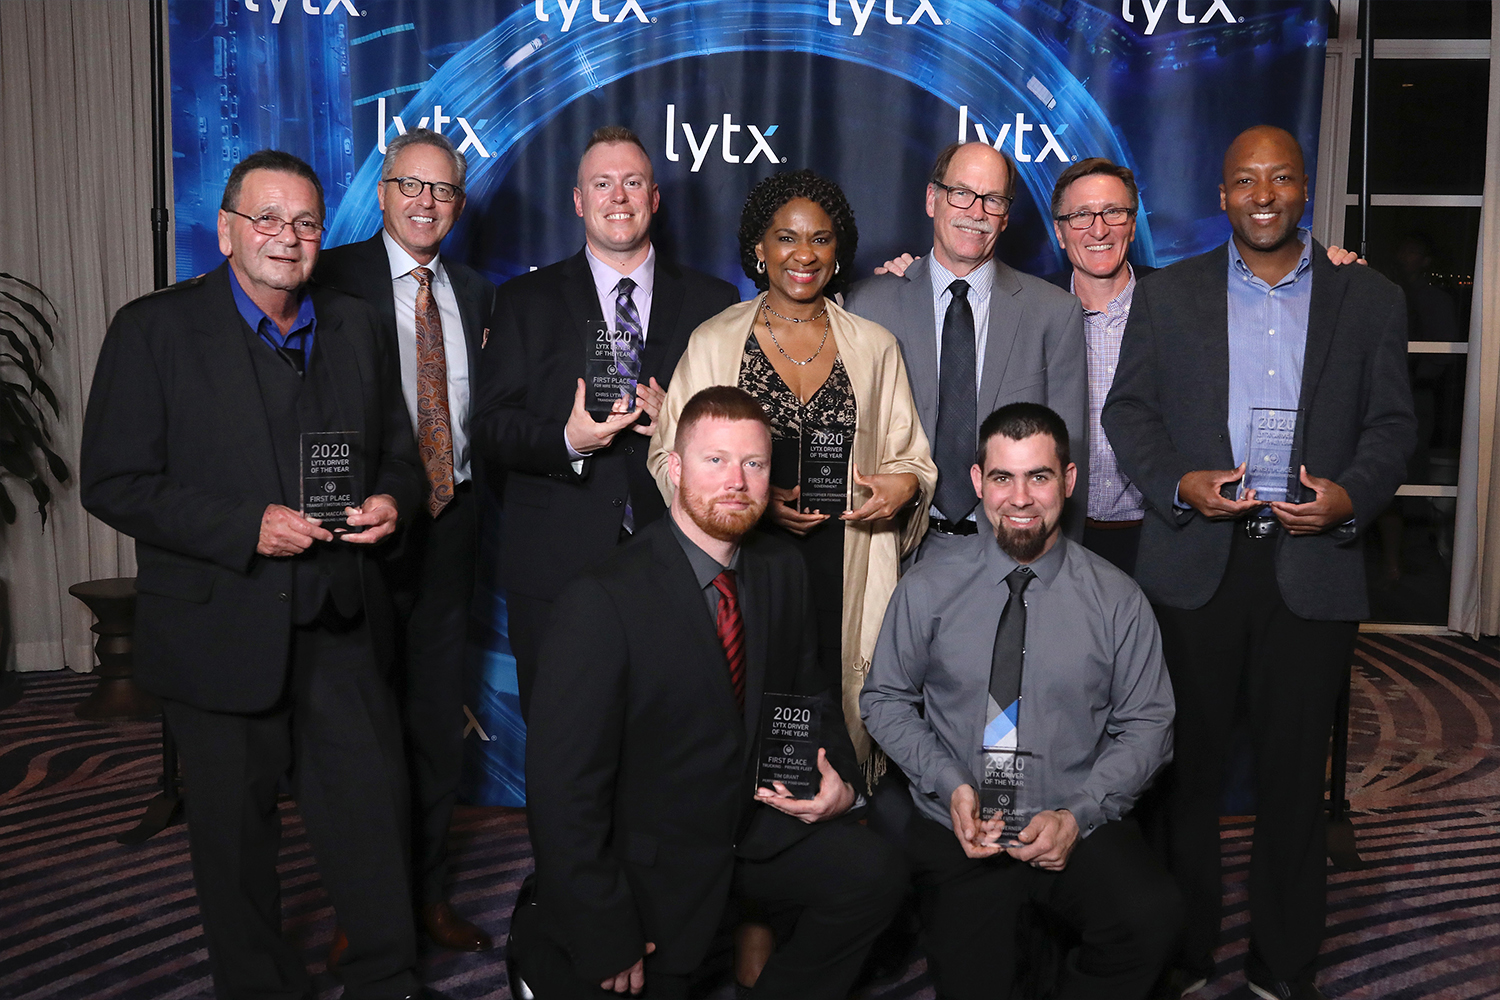 Lytx Driver of the Year Winners, Back Row L – R: Patrick Maccarelli of Greyhound Lines, Driver of the Year, Transit and Motor Coach Category; Brandon Nixon, Lytx CEO; Chris Lytwyn of TransWood Carriers, Driver of the Year, For Hire Trucking Category; Karen Muir of City of North Miami, accepting for Christopher Fernandez, Driver of the Year, Government Category; Del Lisk, Lytx VP of Safety Services; David Riordan, Lytx EVP and Chief Client Officer; Jody Crooks, Waste Connections, Driver of the Year, Waste and Construction Category. Front Row Kneeling L-R: Tim Grant of Performance Food Group, Driver of the Year, Private Trucking Category; Adam Werner of the Murphy-Hoffman Company, Driver of the Year, Services and Utilities Category